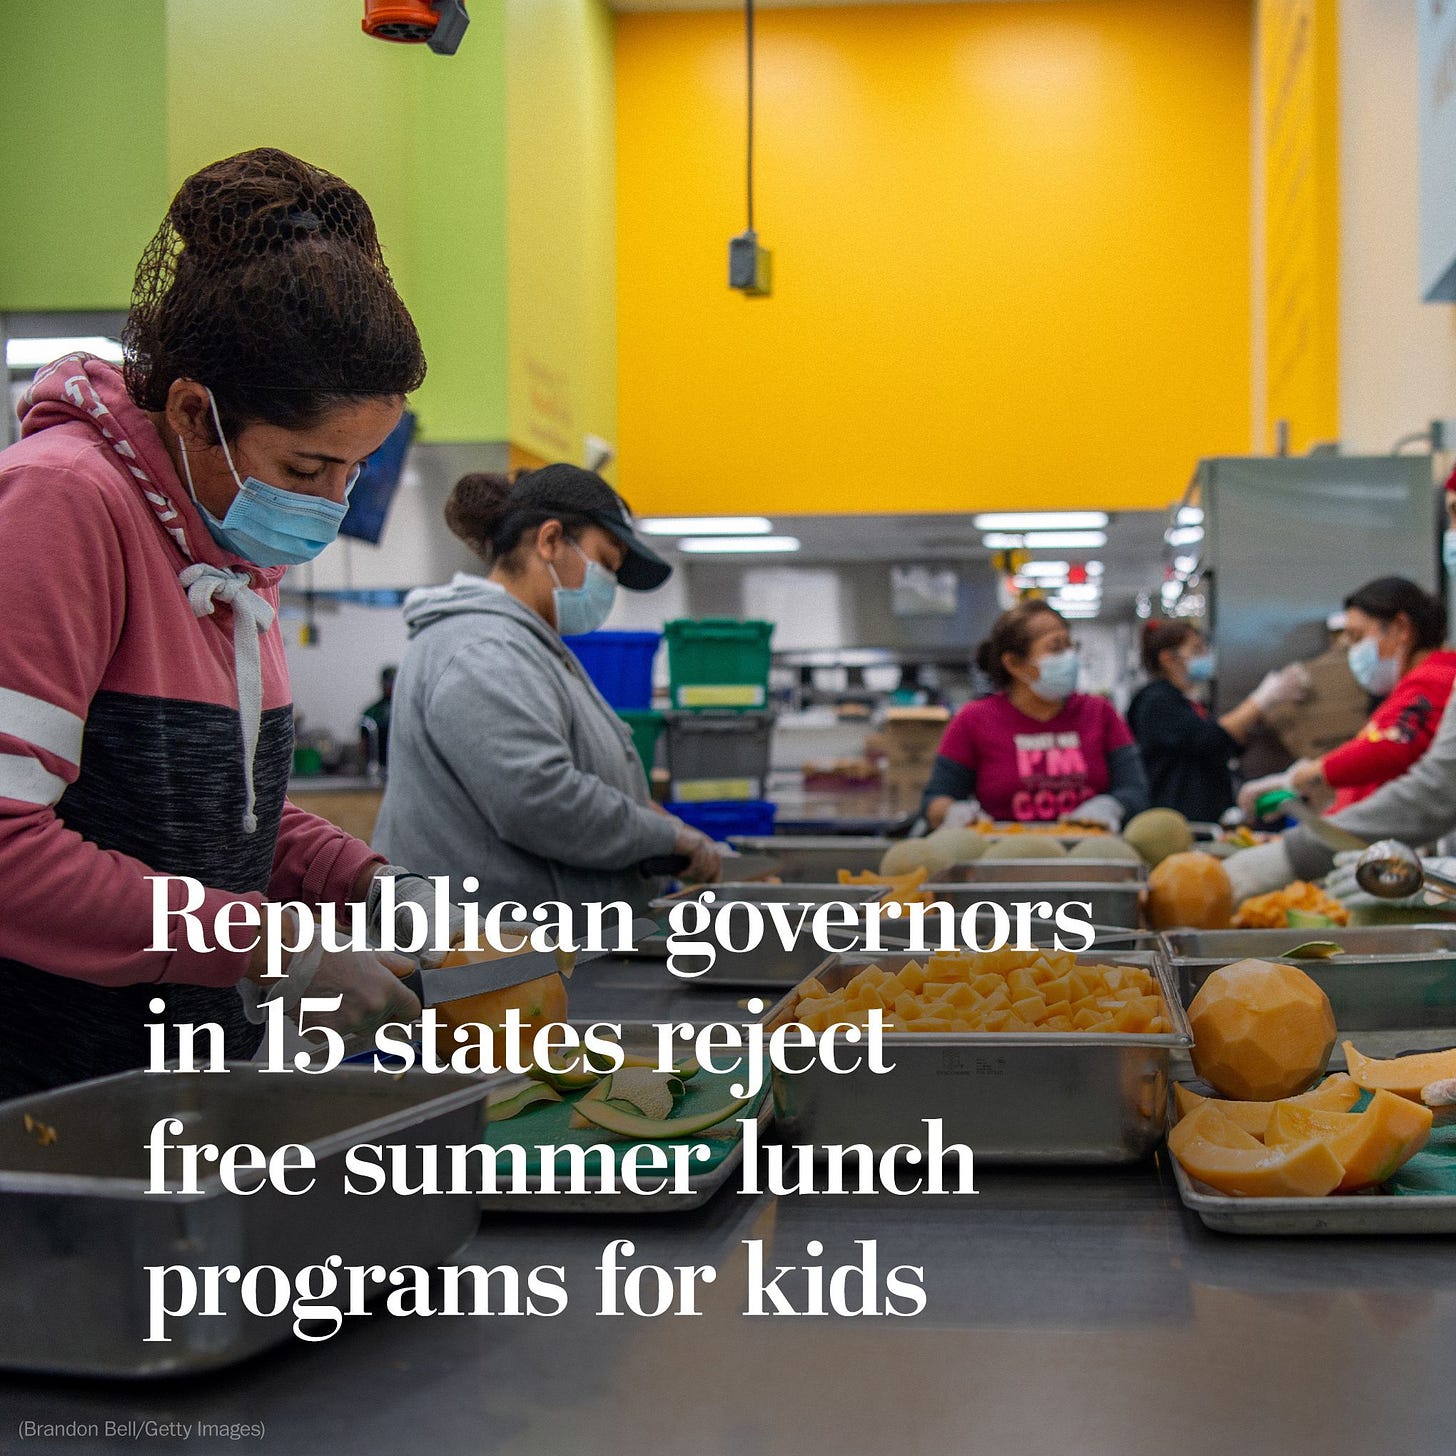 Republican governors are rejecting free summer lunch programs for kids -  The Washington Post